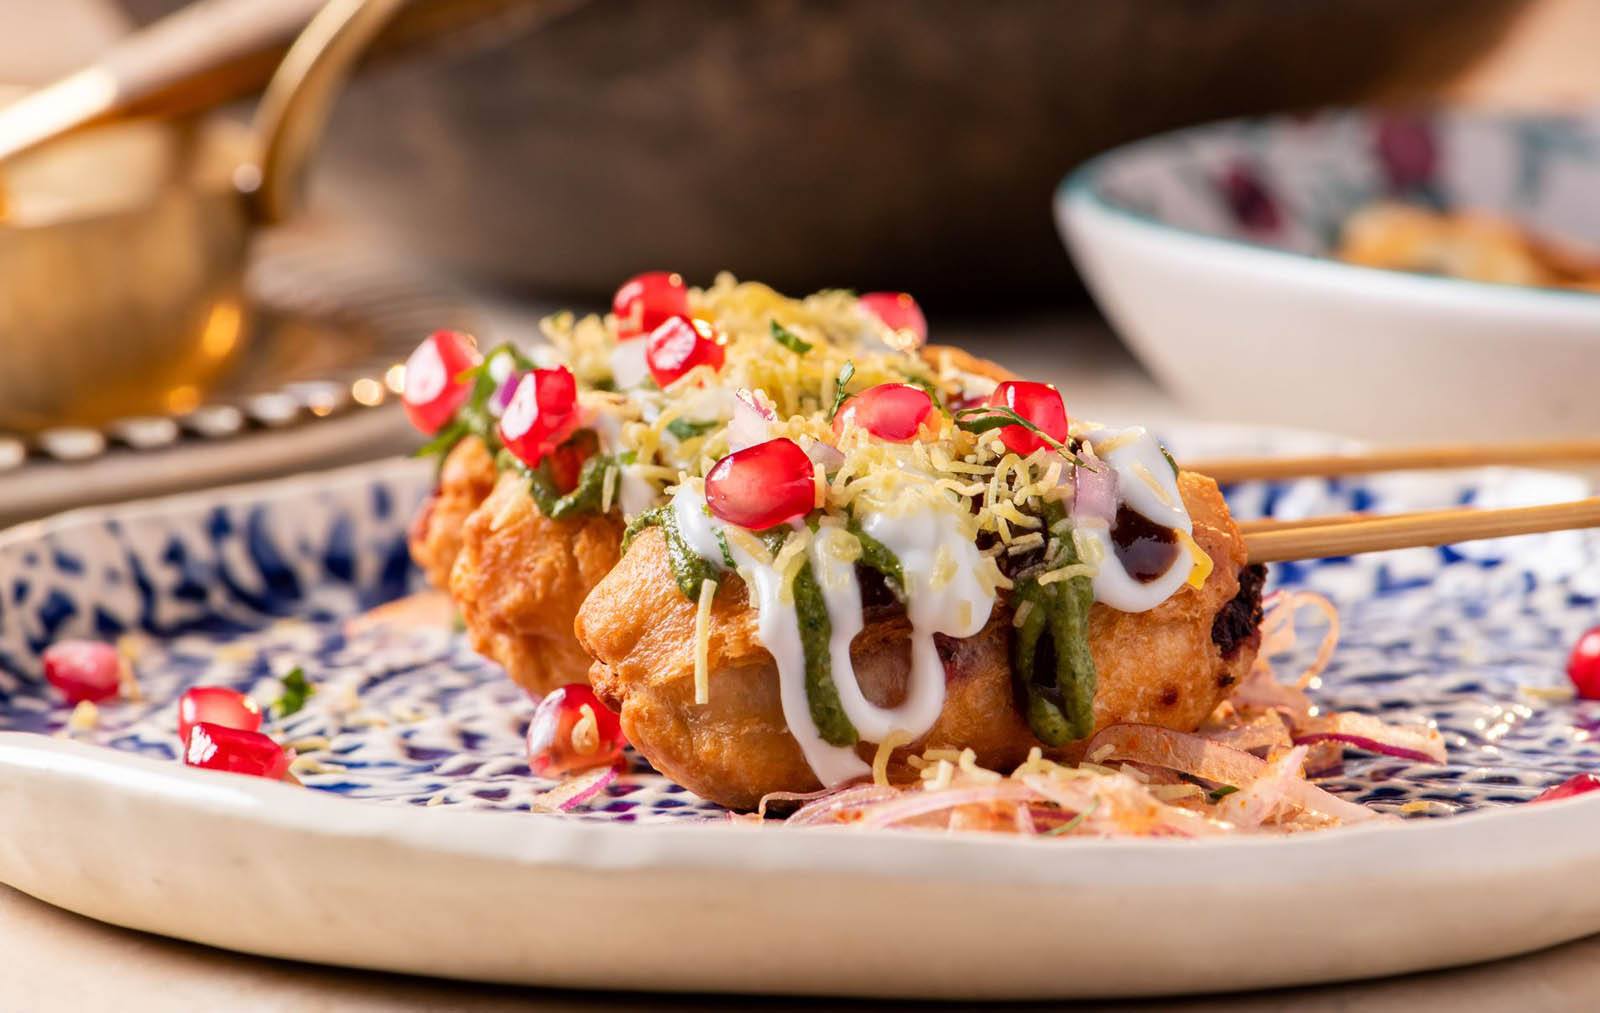 Things to do in Hong Kong in May include trying Chaat's new dishes inspired by street food